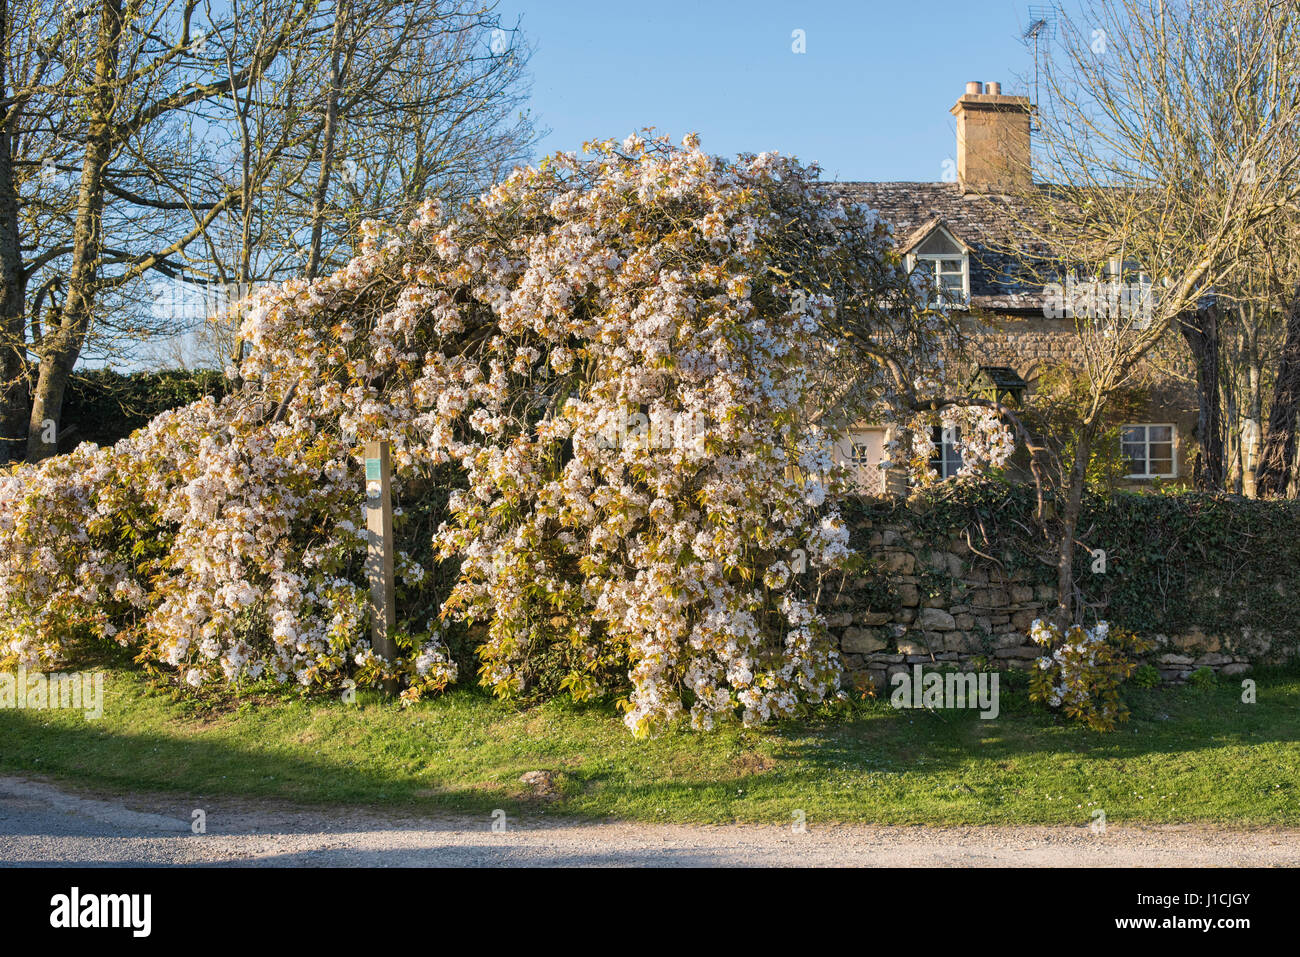 Evening sunlight on pear tree blossom in Taddington, Cotswolds, Gloucestershire, England Stock Photo